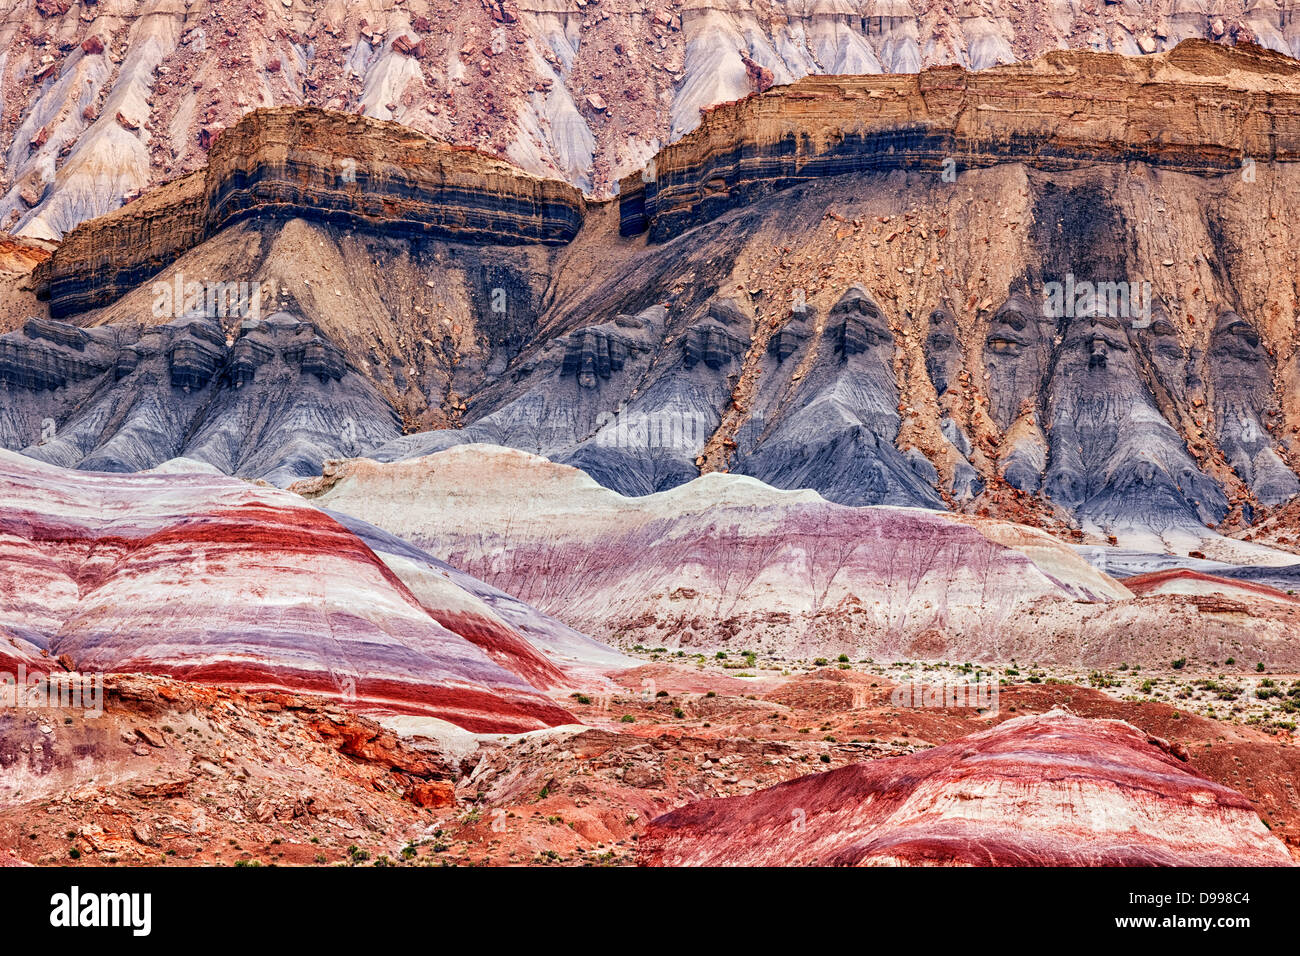 Overnight rainfall enriches volcanic ash deposits at the Caneville Badlands bordering Utah's Capitol Reef National Park. Stock Photo